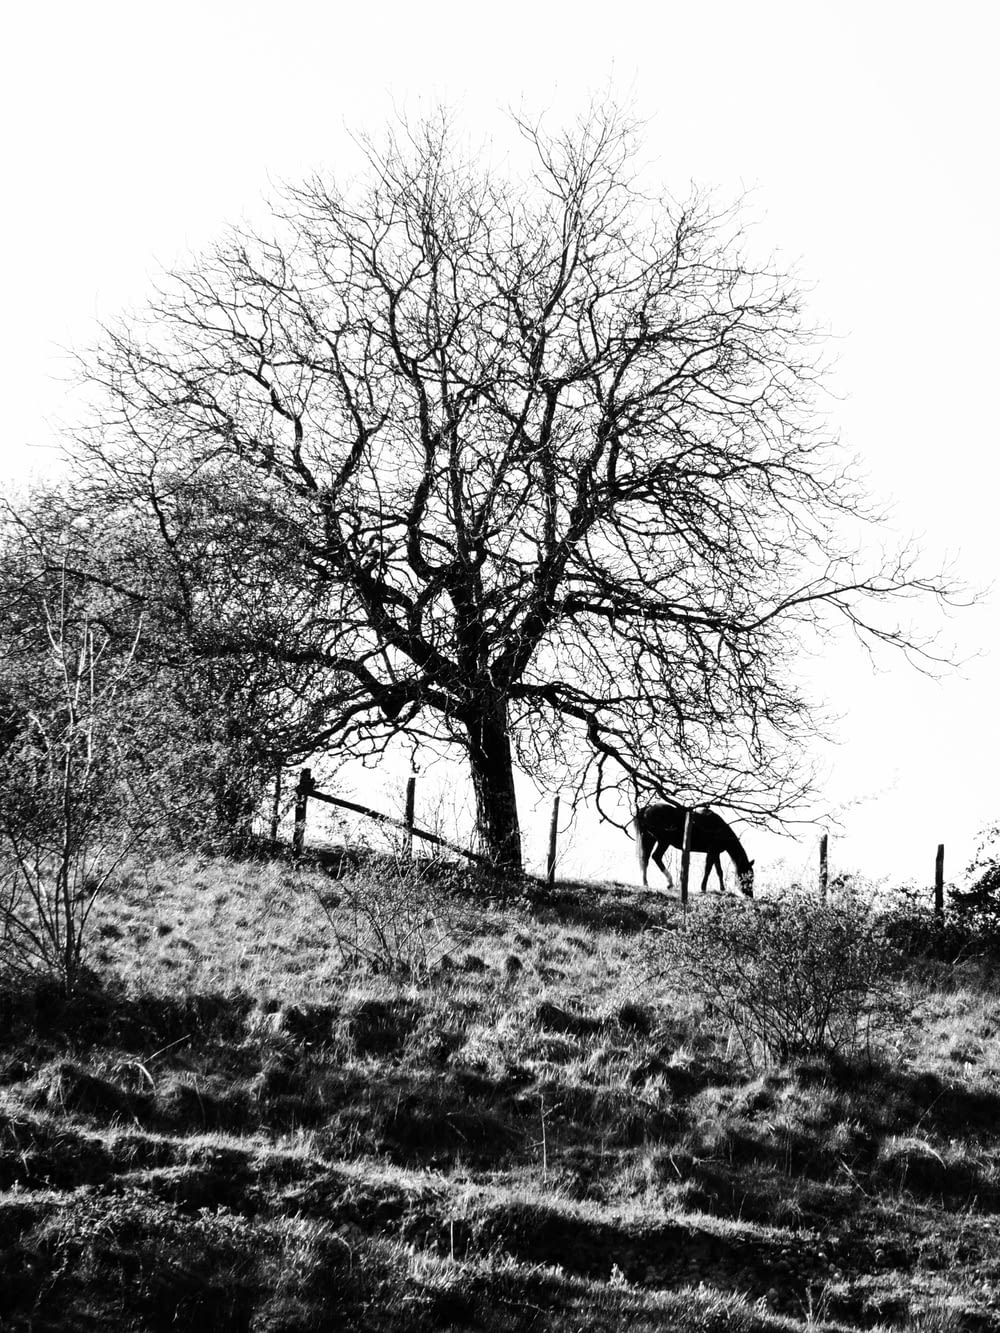 grayscale photo of horse in the forest